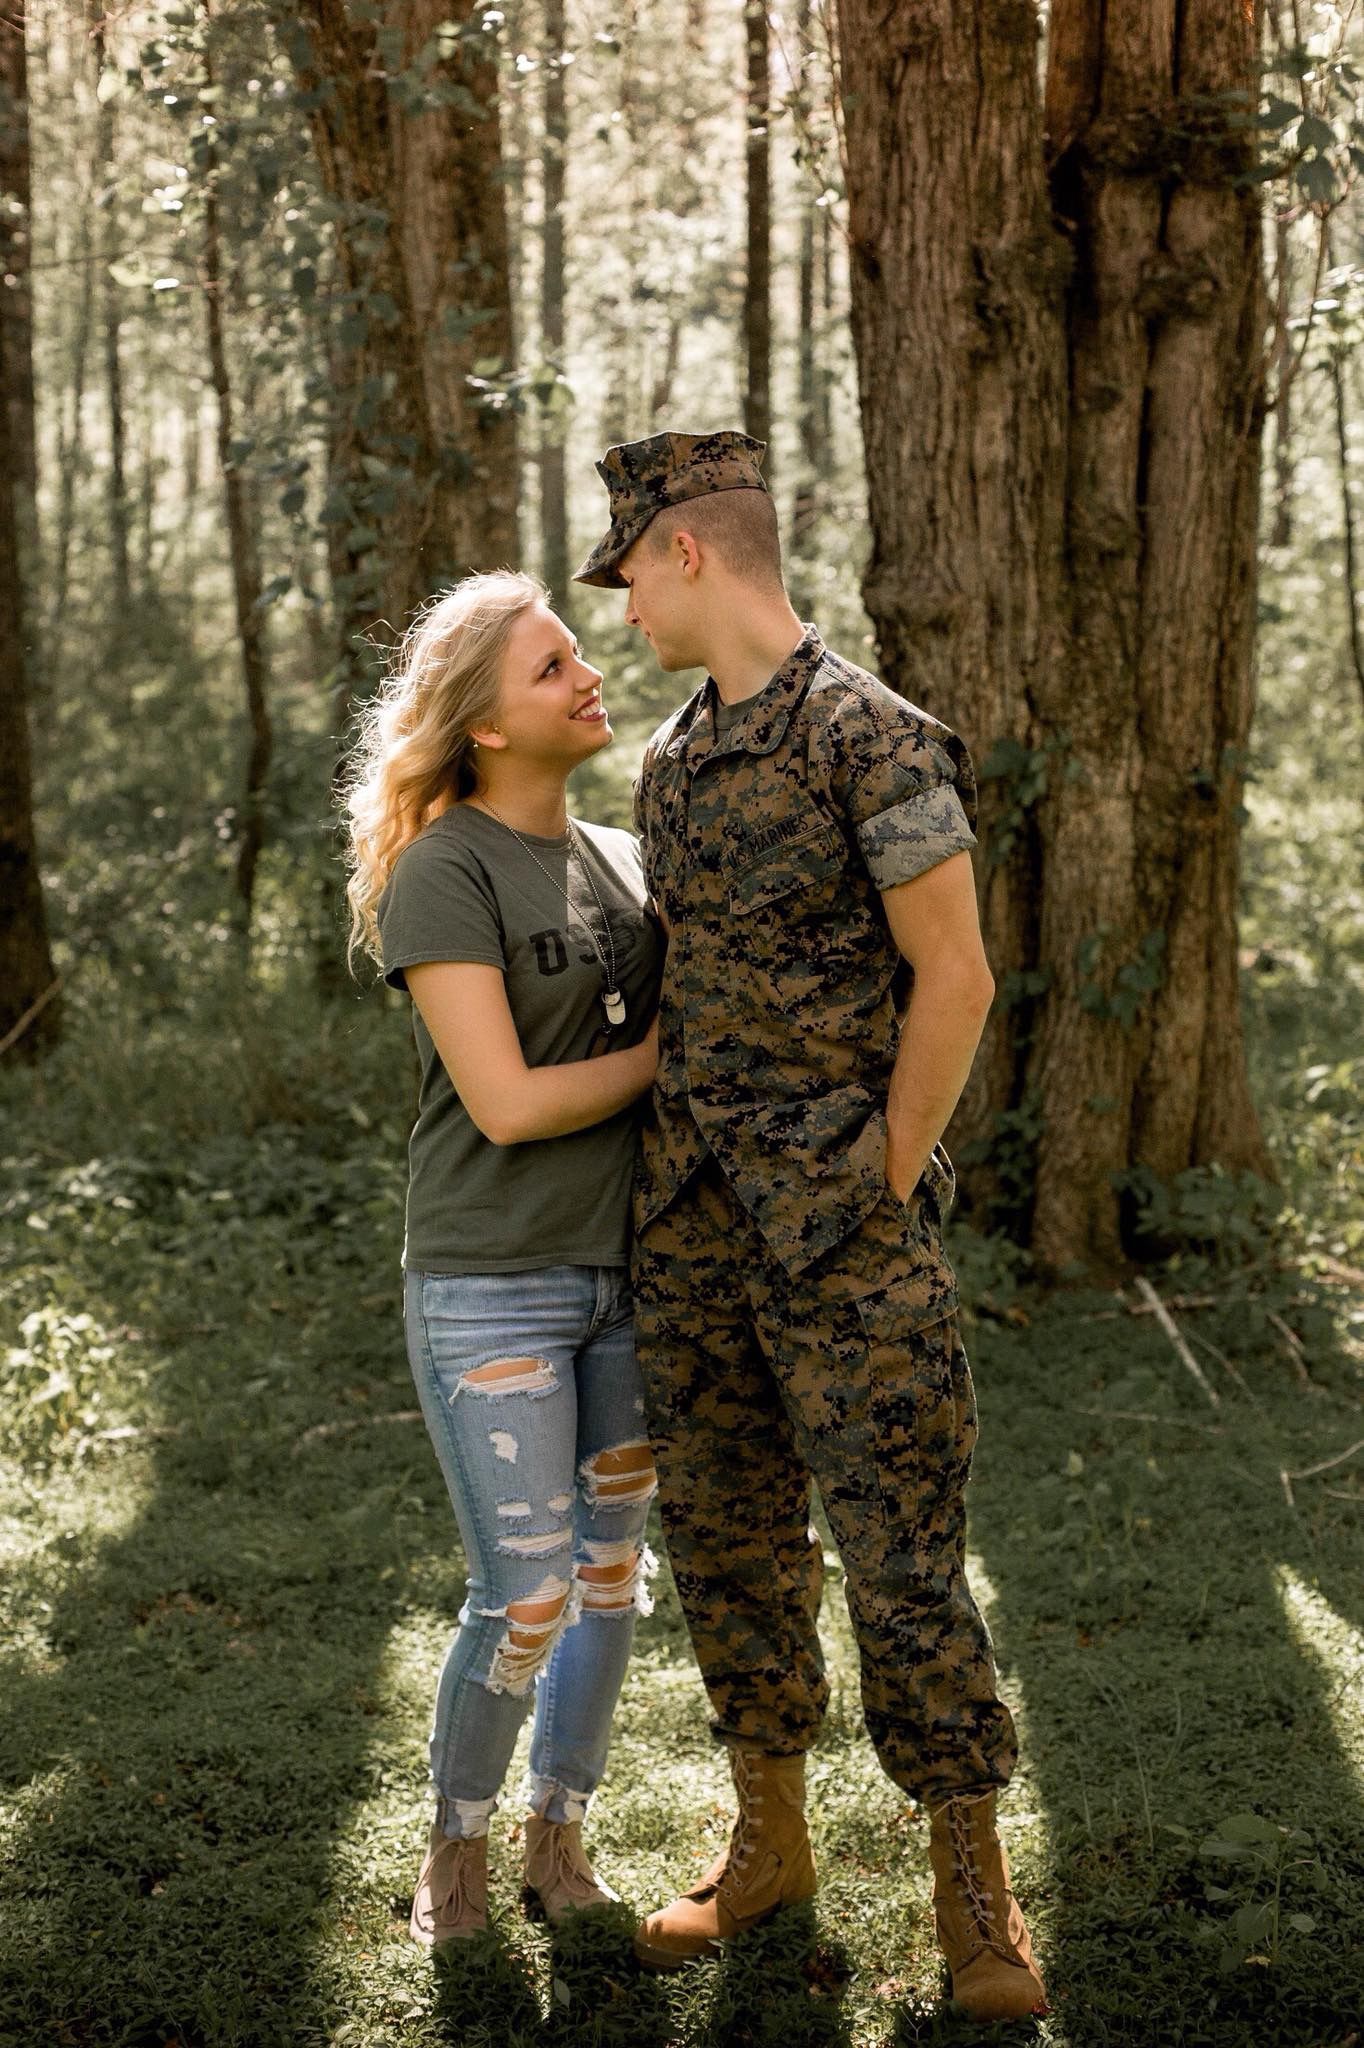 marine corps couples picture. Army couple picture, Military couples, Military couple picture